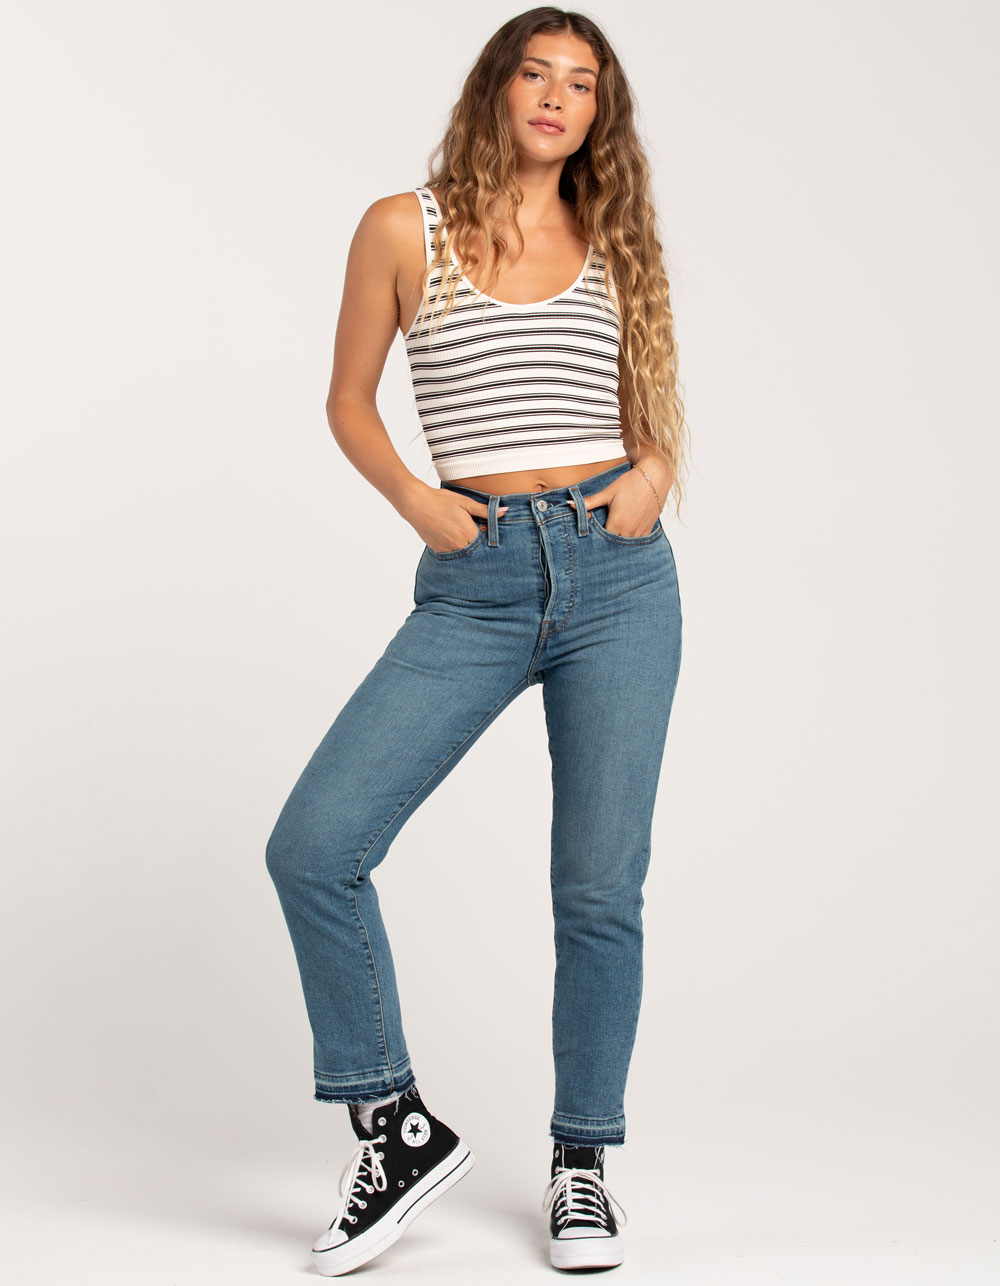 LEVI'S Wedgie Straight Womens Jeans - Turned On Me - MED BLAST